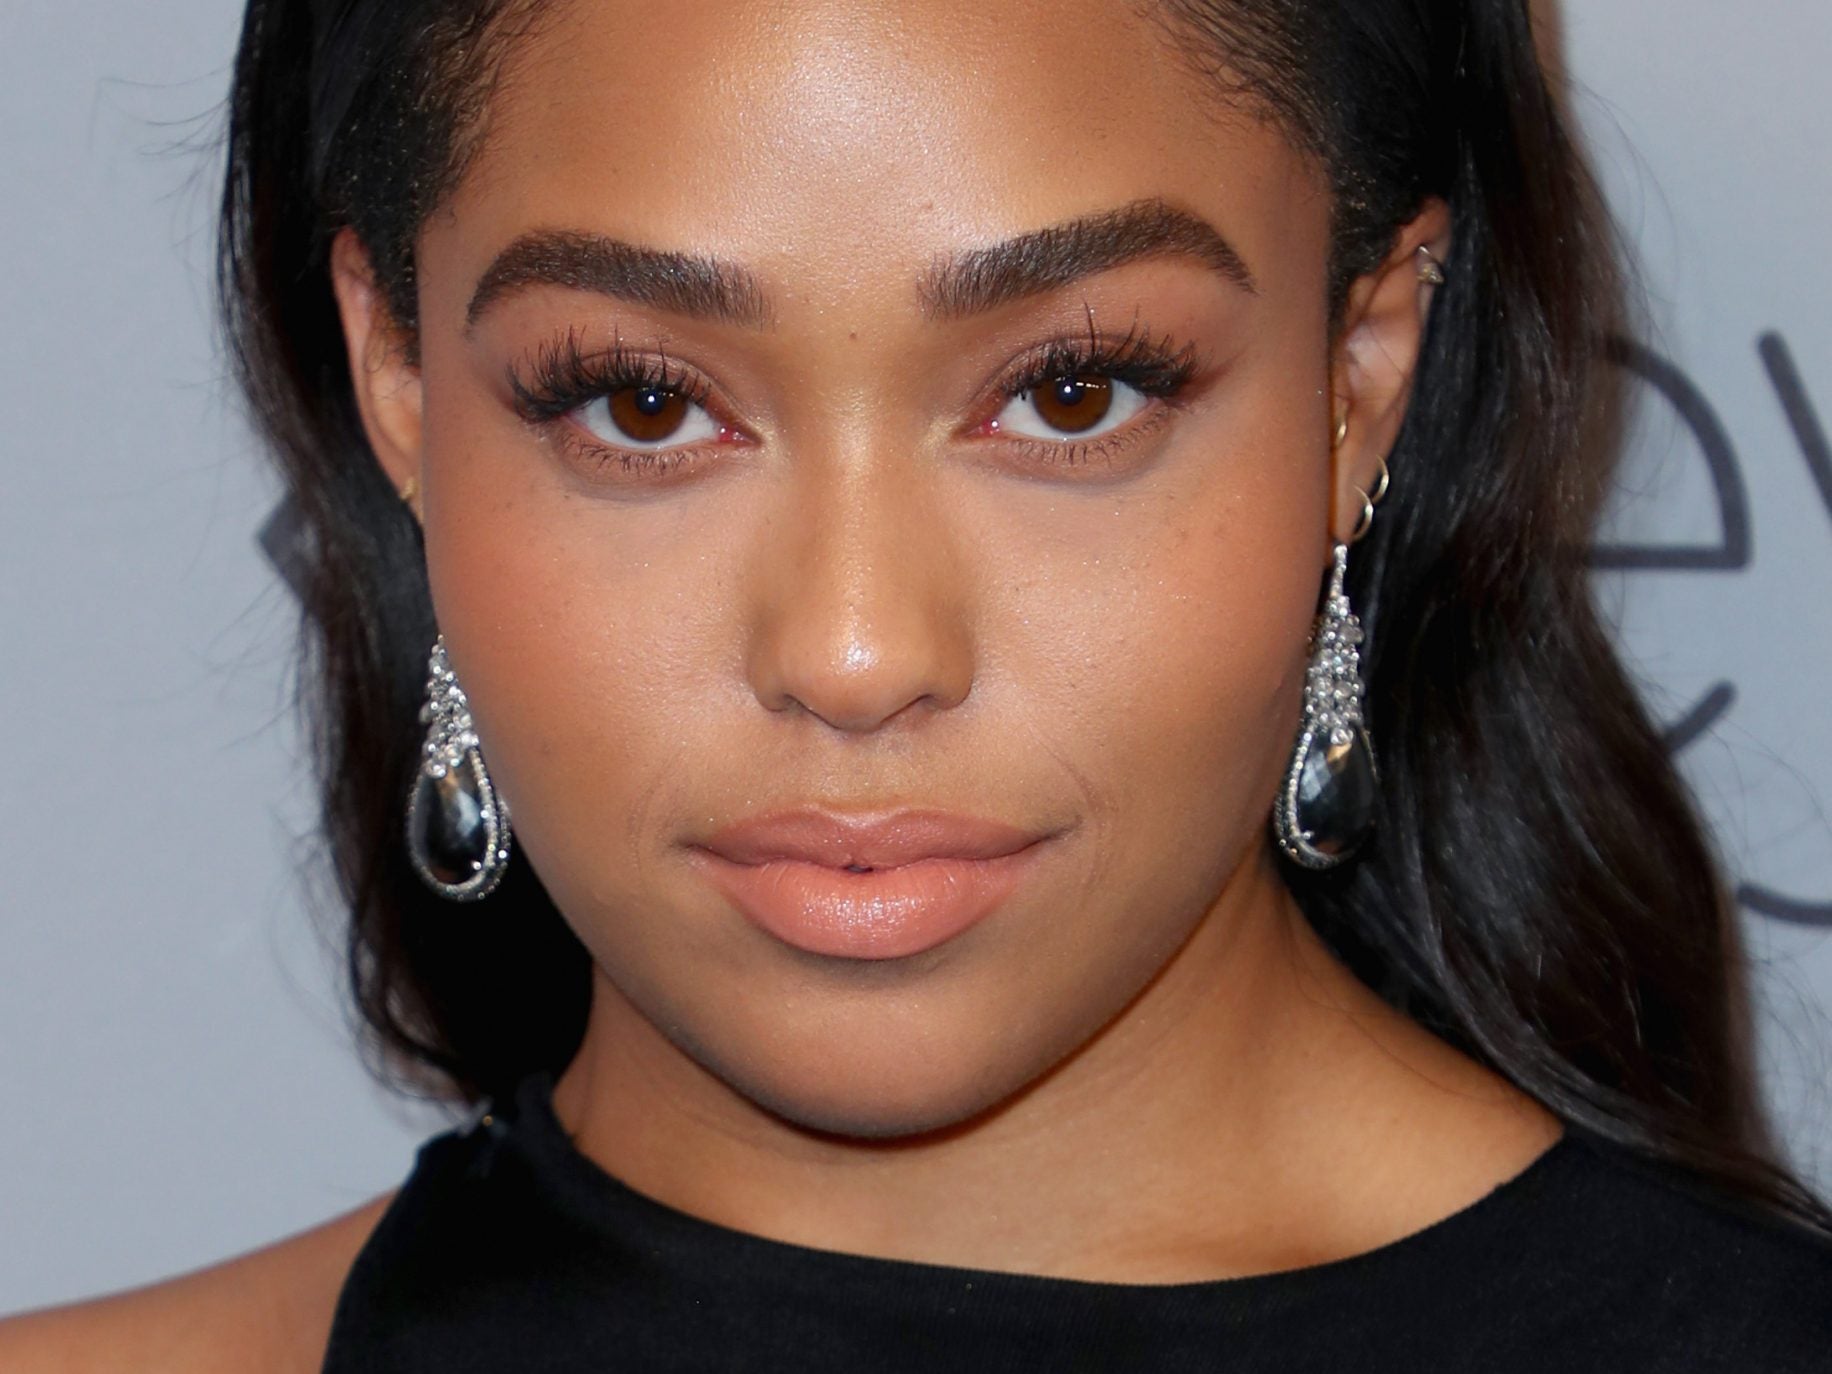 Jordyn Woods And Her Red-Hot Fashion Moments: Here Are 15 Of Her Best Looks!